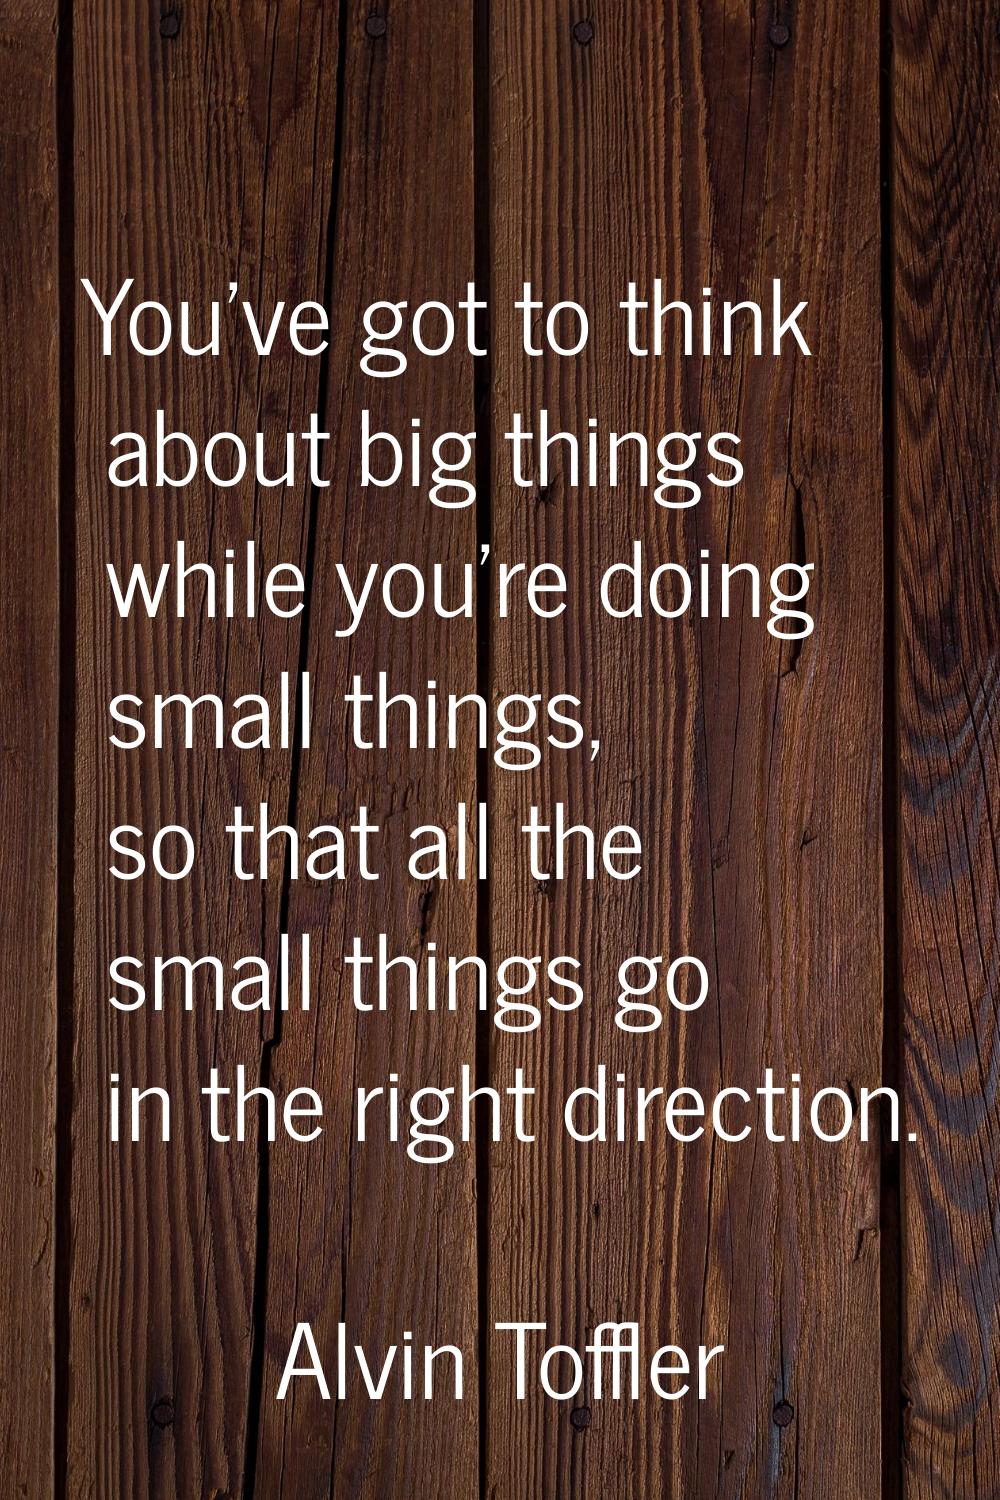 You've got to think about big things while you're doing small things, so that all the small things 